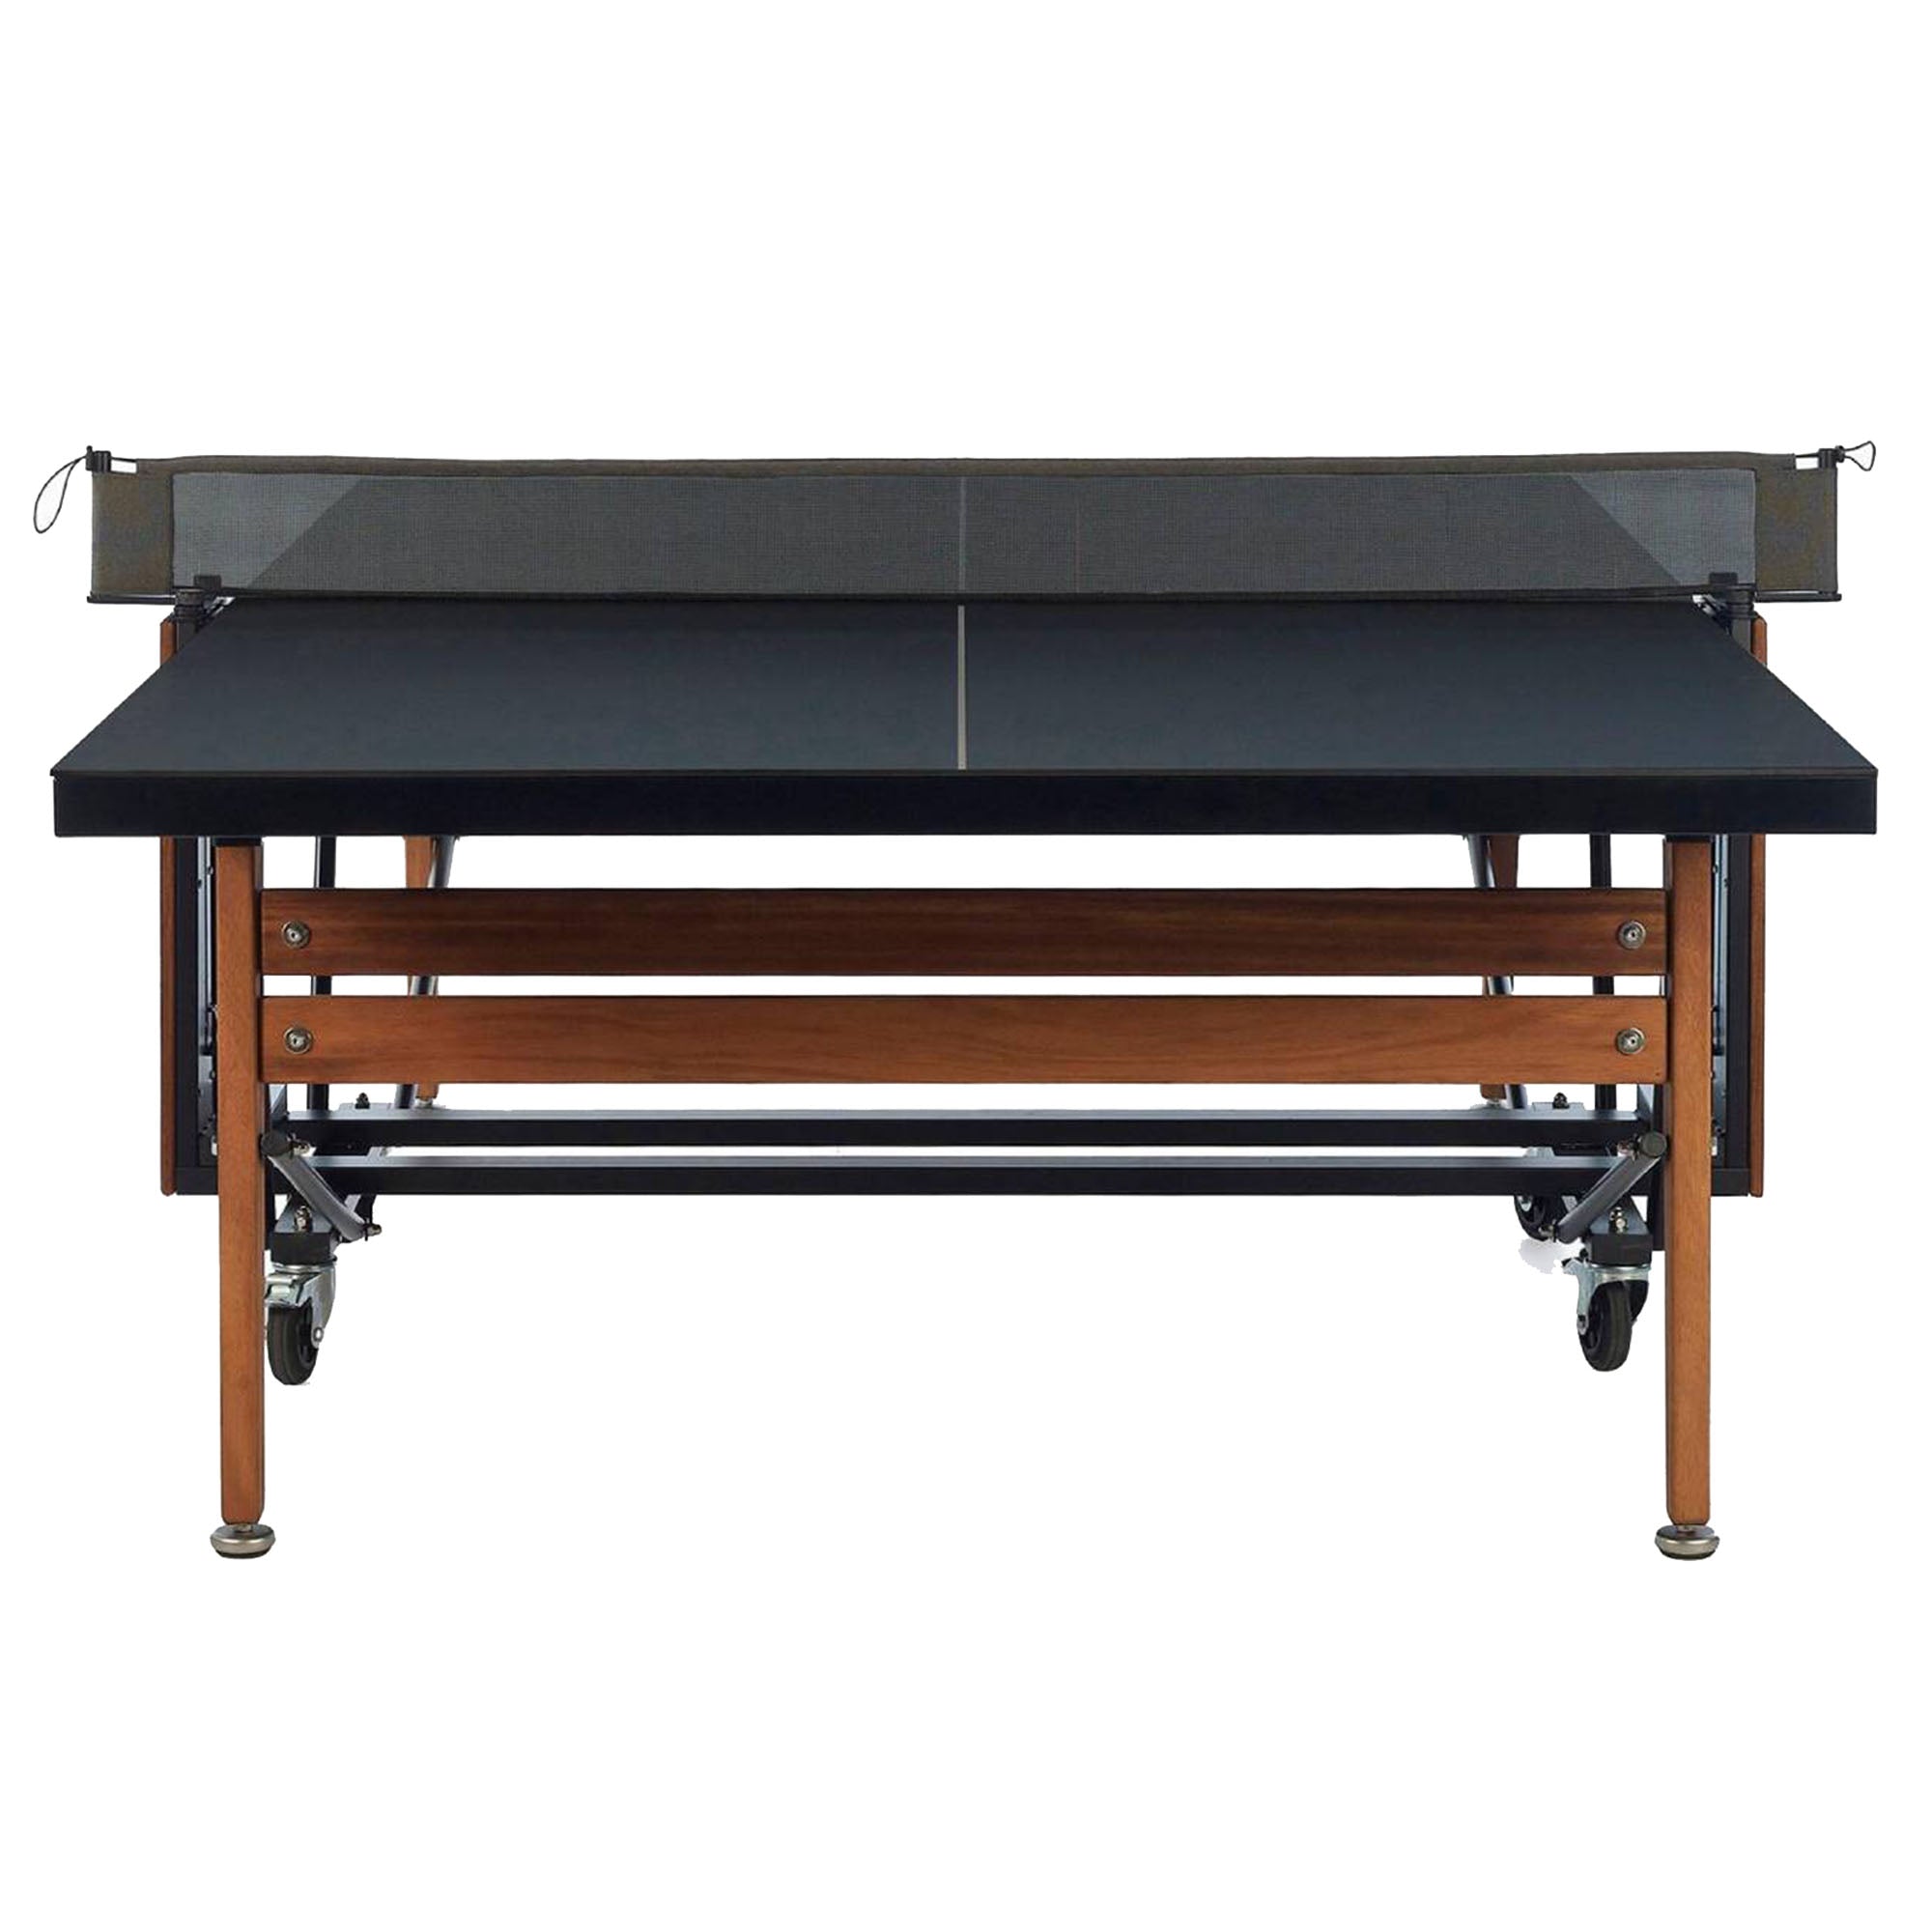 RS Folding Ping Pong Table: Indoor/Outdoor: Black